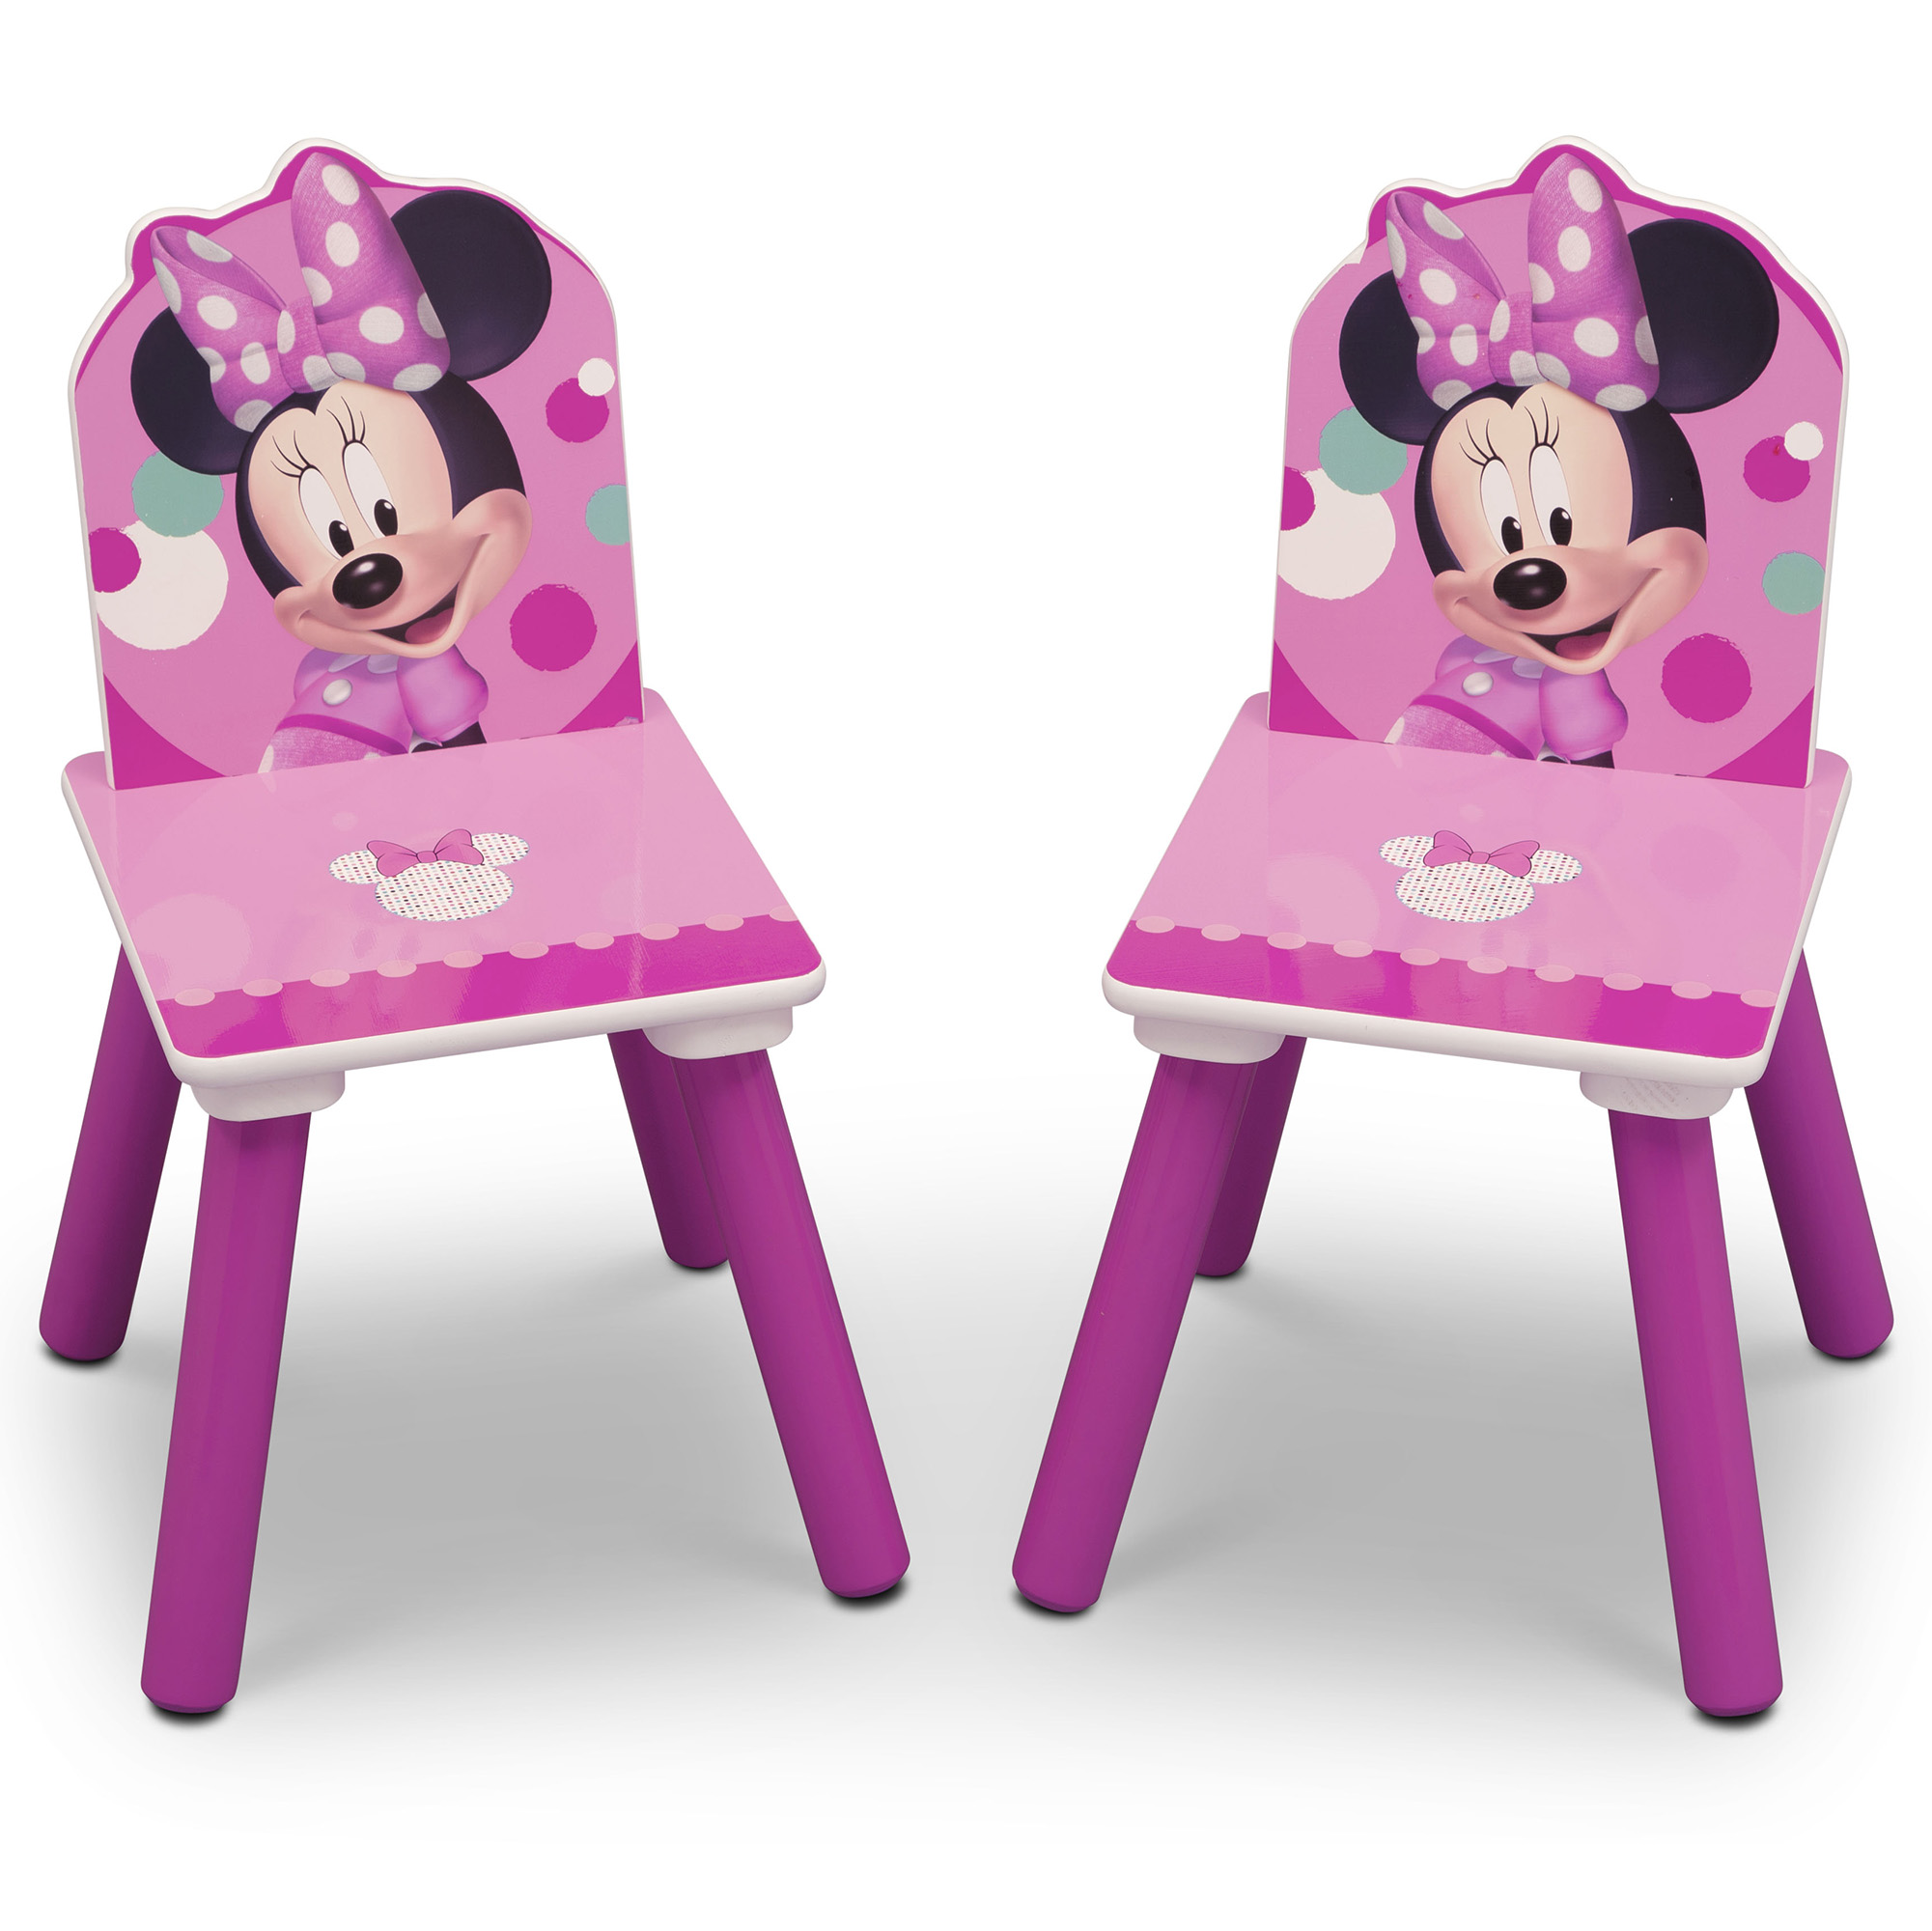 Minnie Mouse 4-Piece Wood Toddler Playroom Set – Includes Table, 2 Chairs & Toy Bin, Pink - image 9 of 13